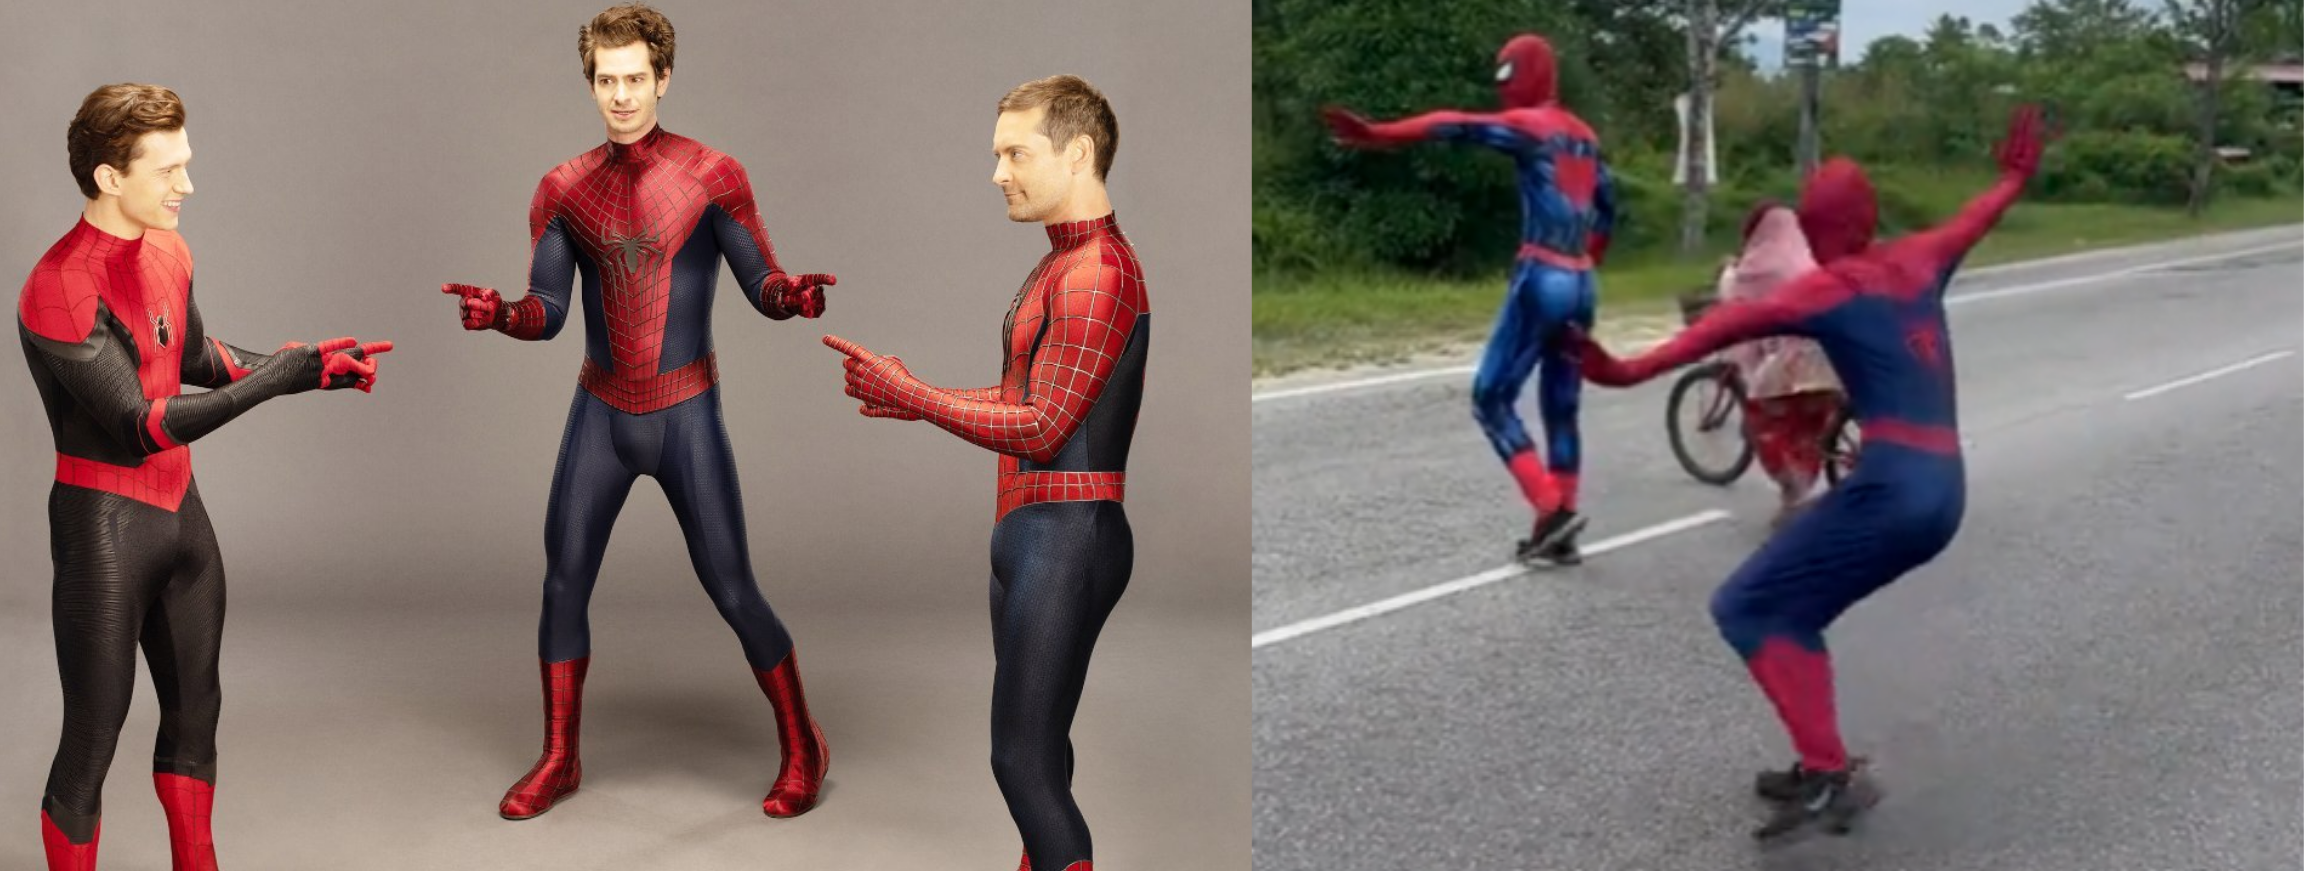 Two Spider-Men wandered around and found themselves helping an old lady crossing the road in Malaysia.